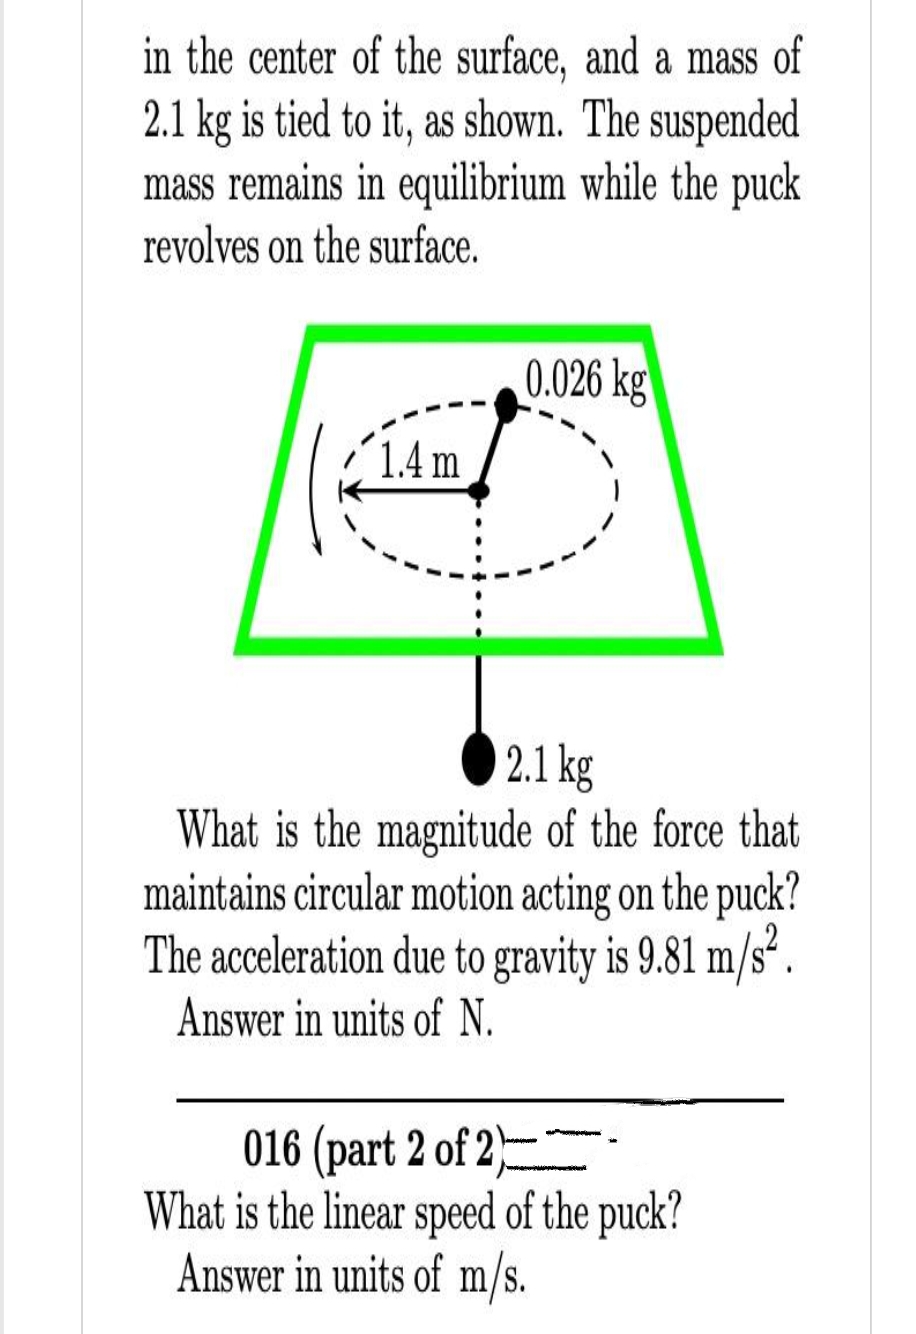 in the center of the surface, and a mass of
2.1 kg is tied to it, as shown. The suspended
mass remains in equilibrium while the puck
revolves on the surface.
1.4 m
0.026 kg
2.1 kg
What is the magnitude of the force that
maintains circular motion acting on the puck?
The acceleration due to gravity is 9.81 m/s².
Answer in units of N.
016 (part 2 of 2)
What is the linear speed of the puck?
Answer in units of m/s.